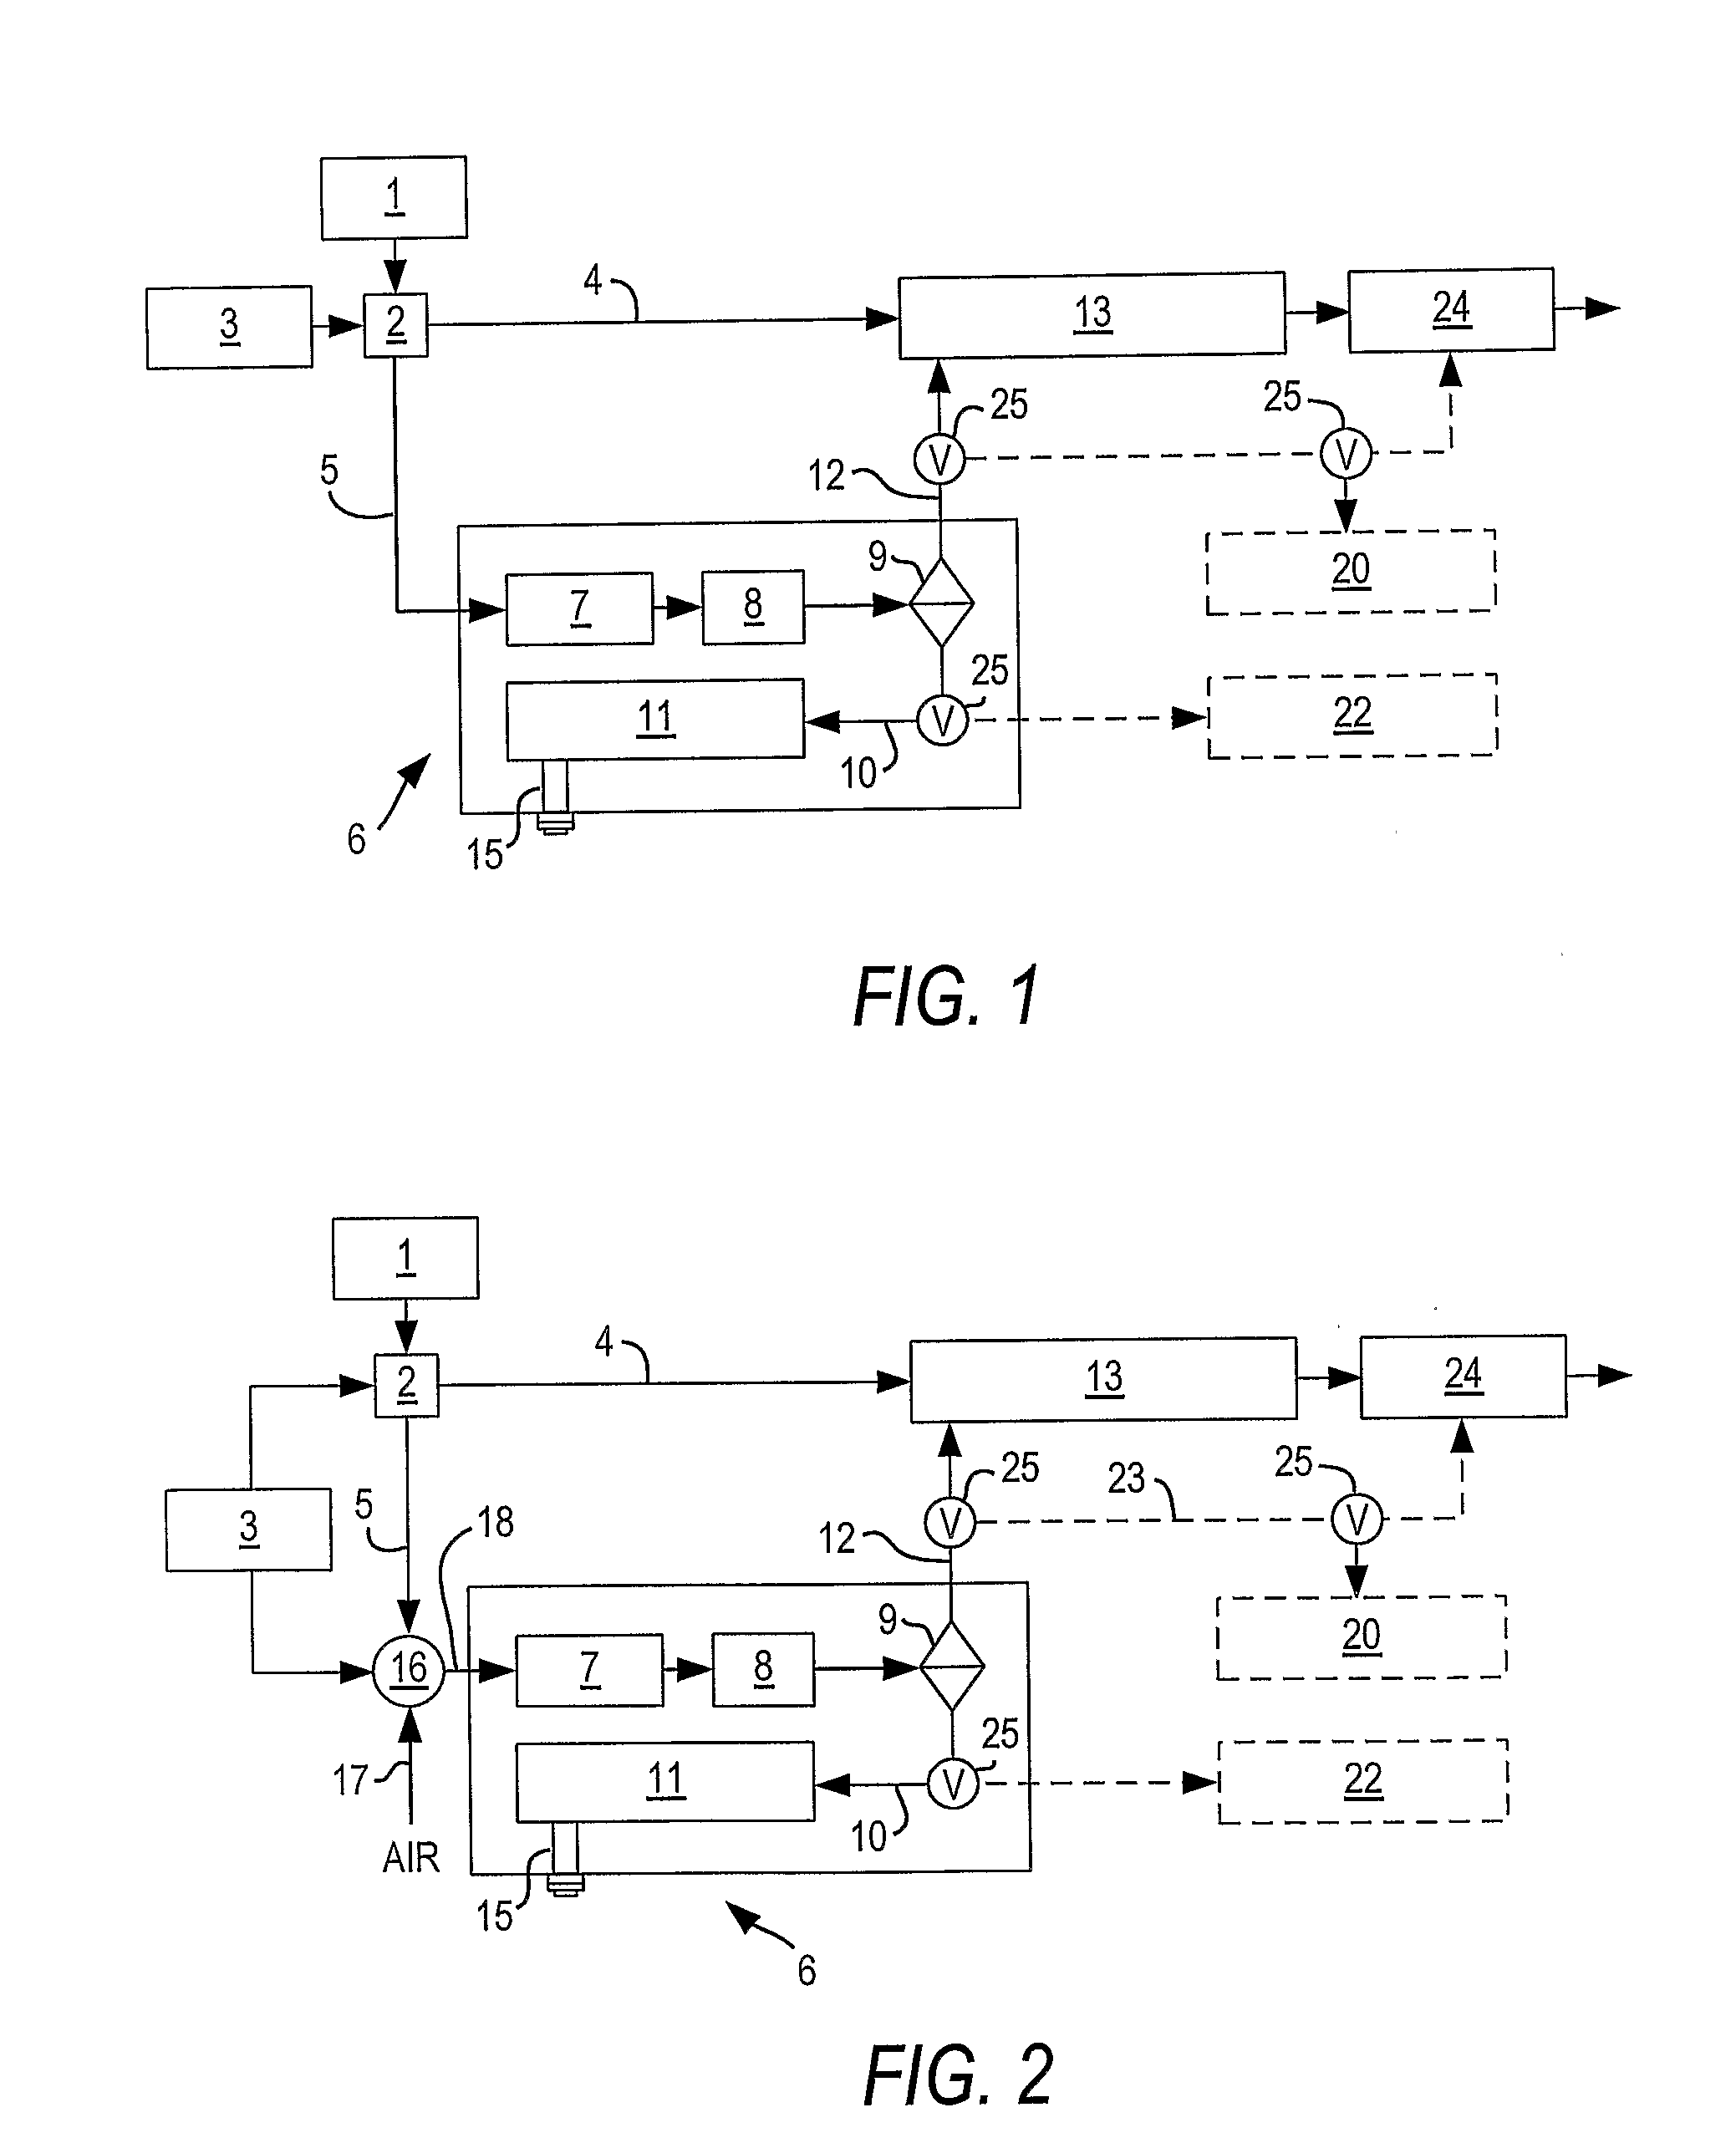 Method for on board decarbonization of hydrocarbon fuels in a vehicle